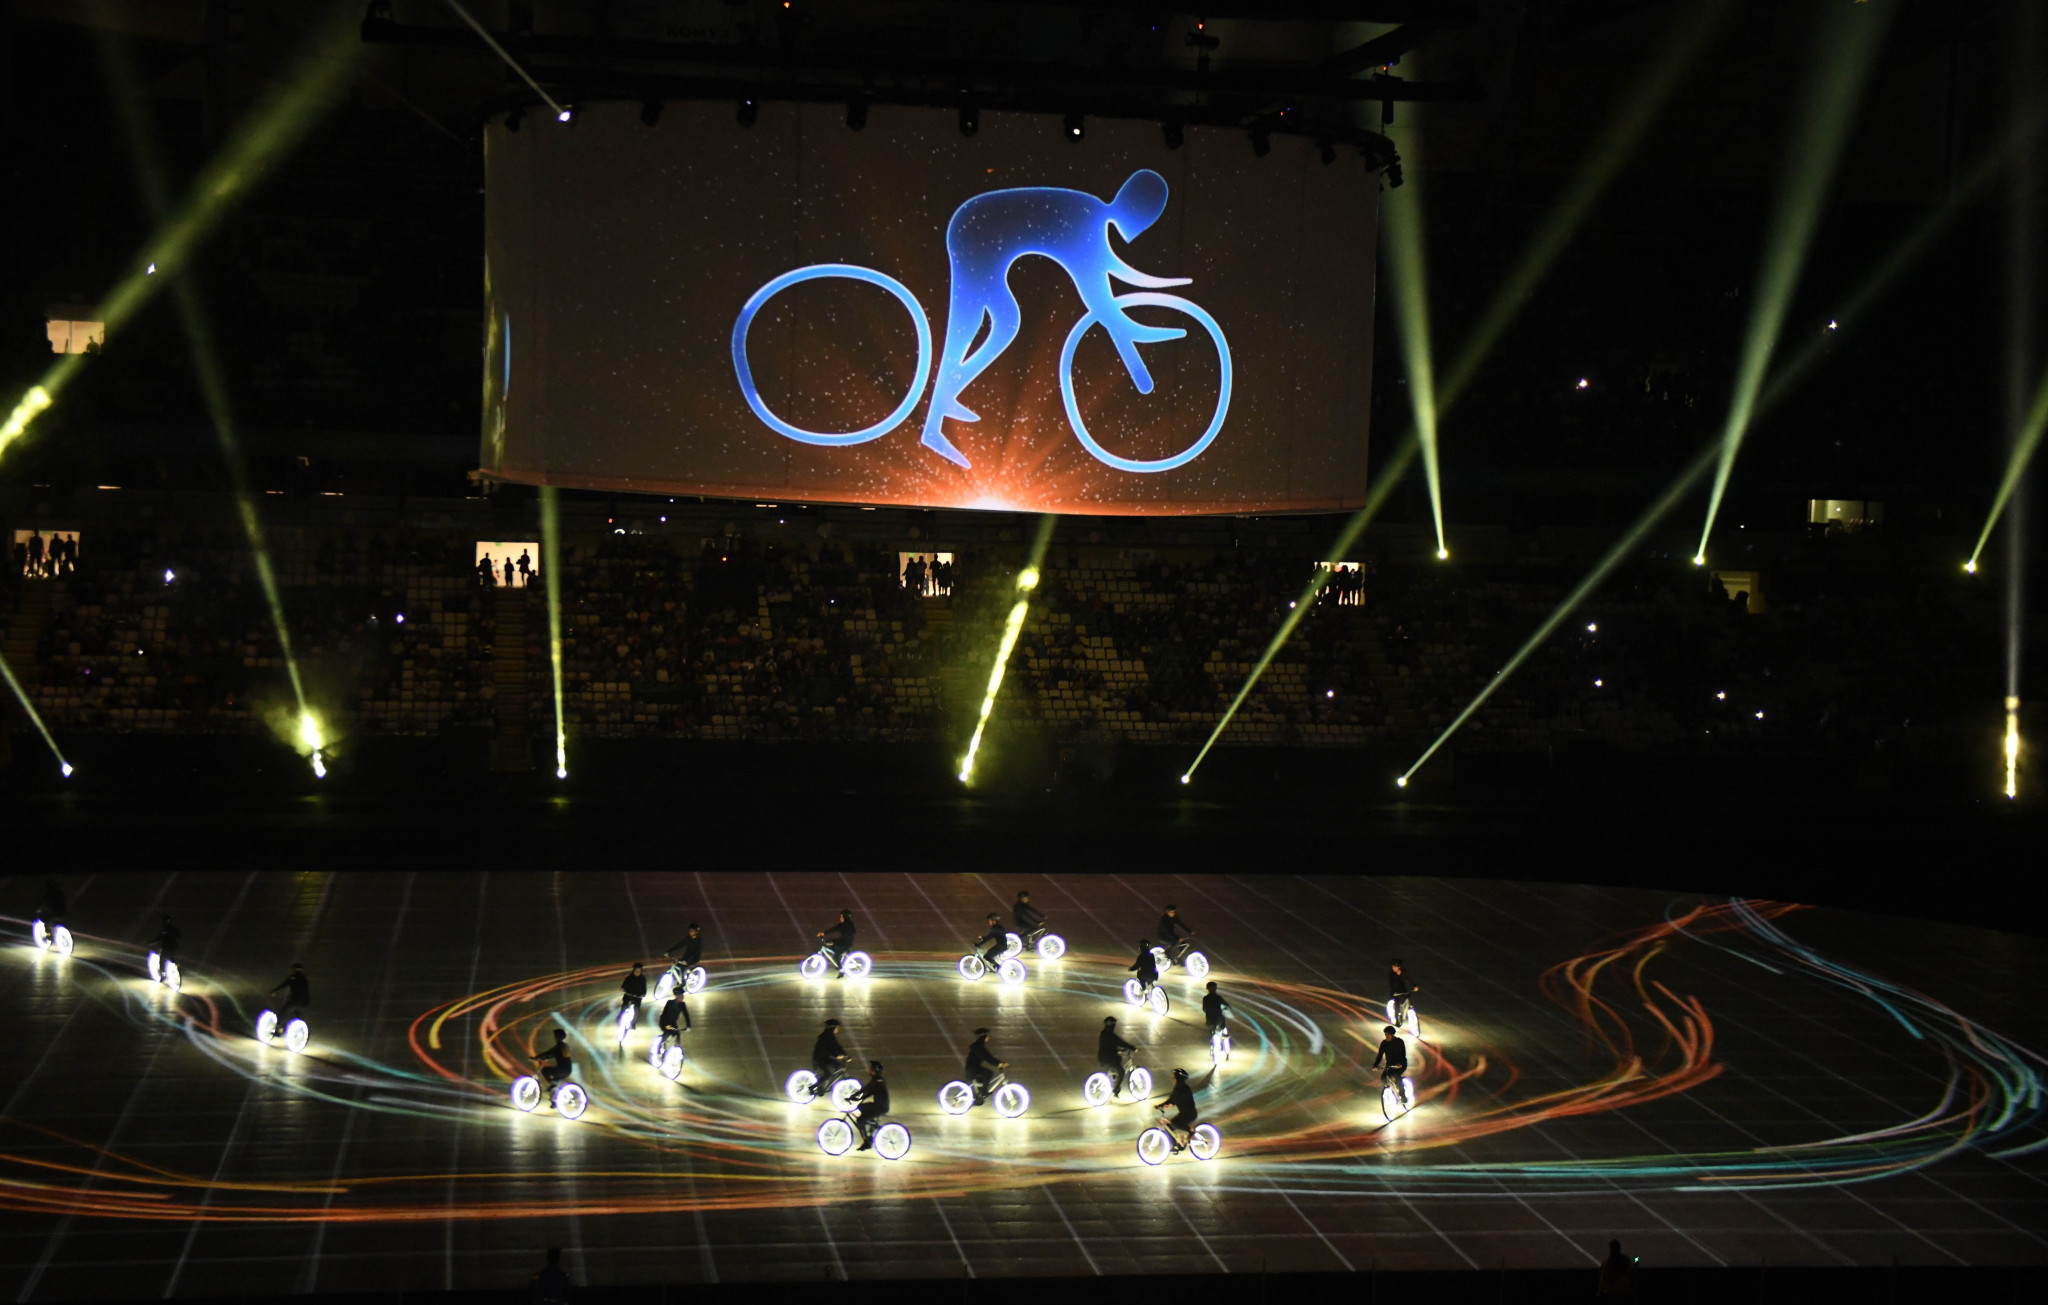 All 19 sports were displayed in sensational style during the ceremony ©Konya 2021